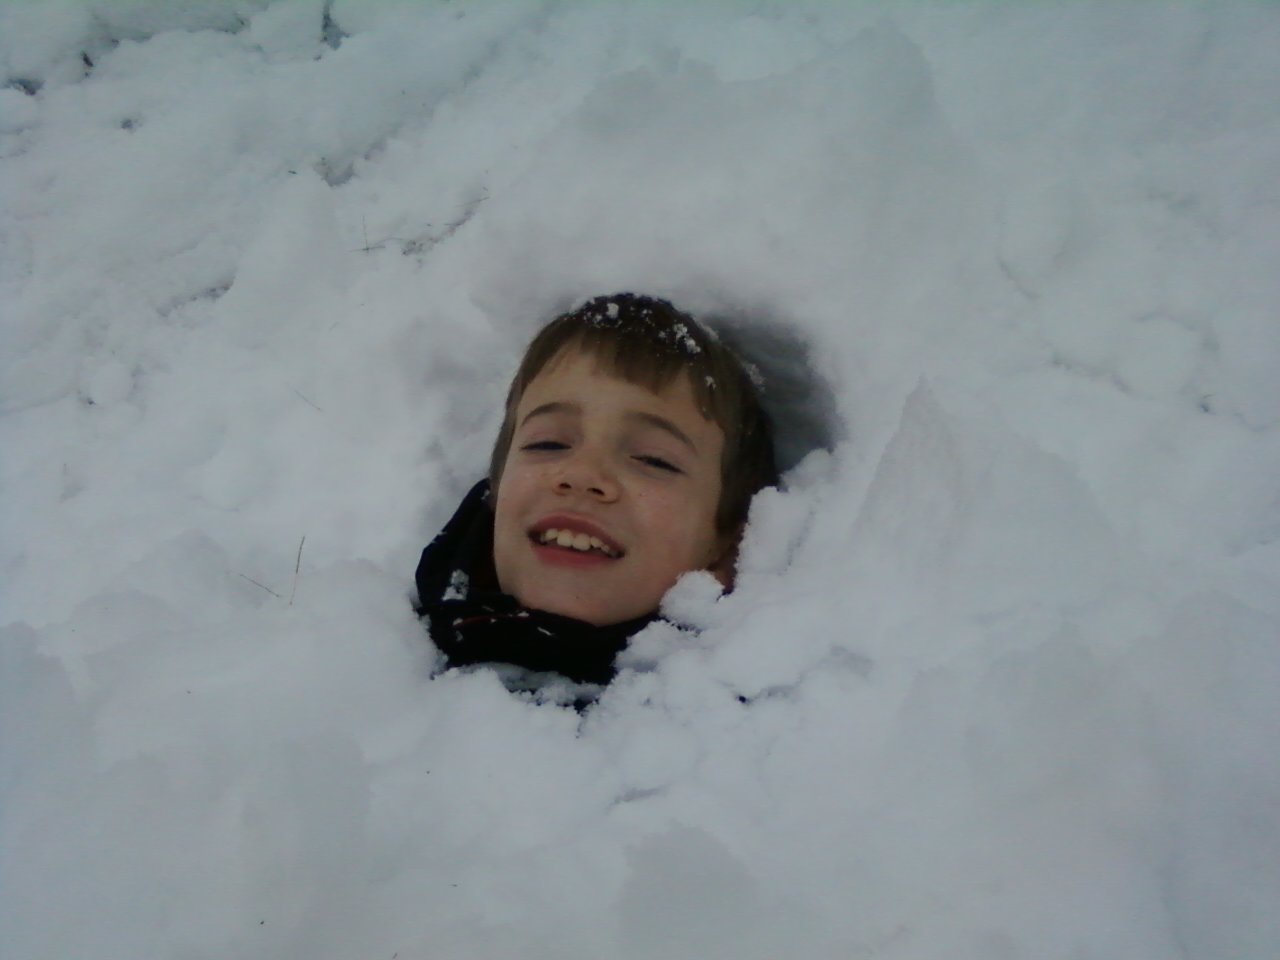 Brandon's younger self in snow